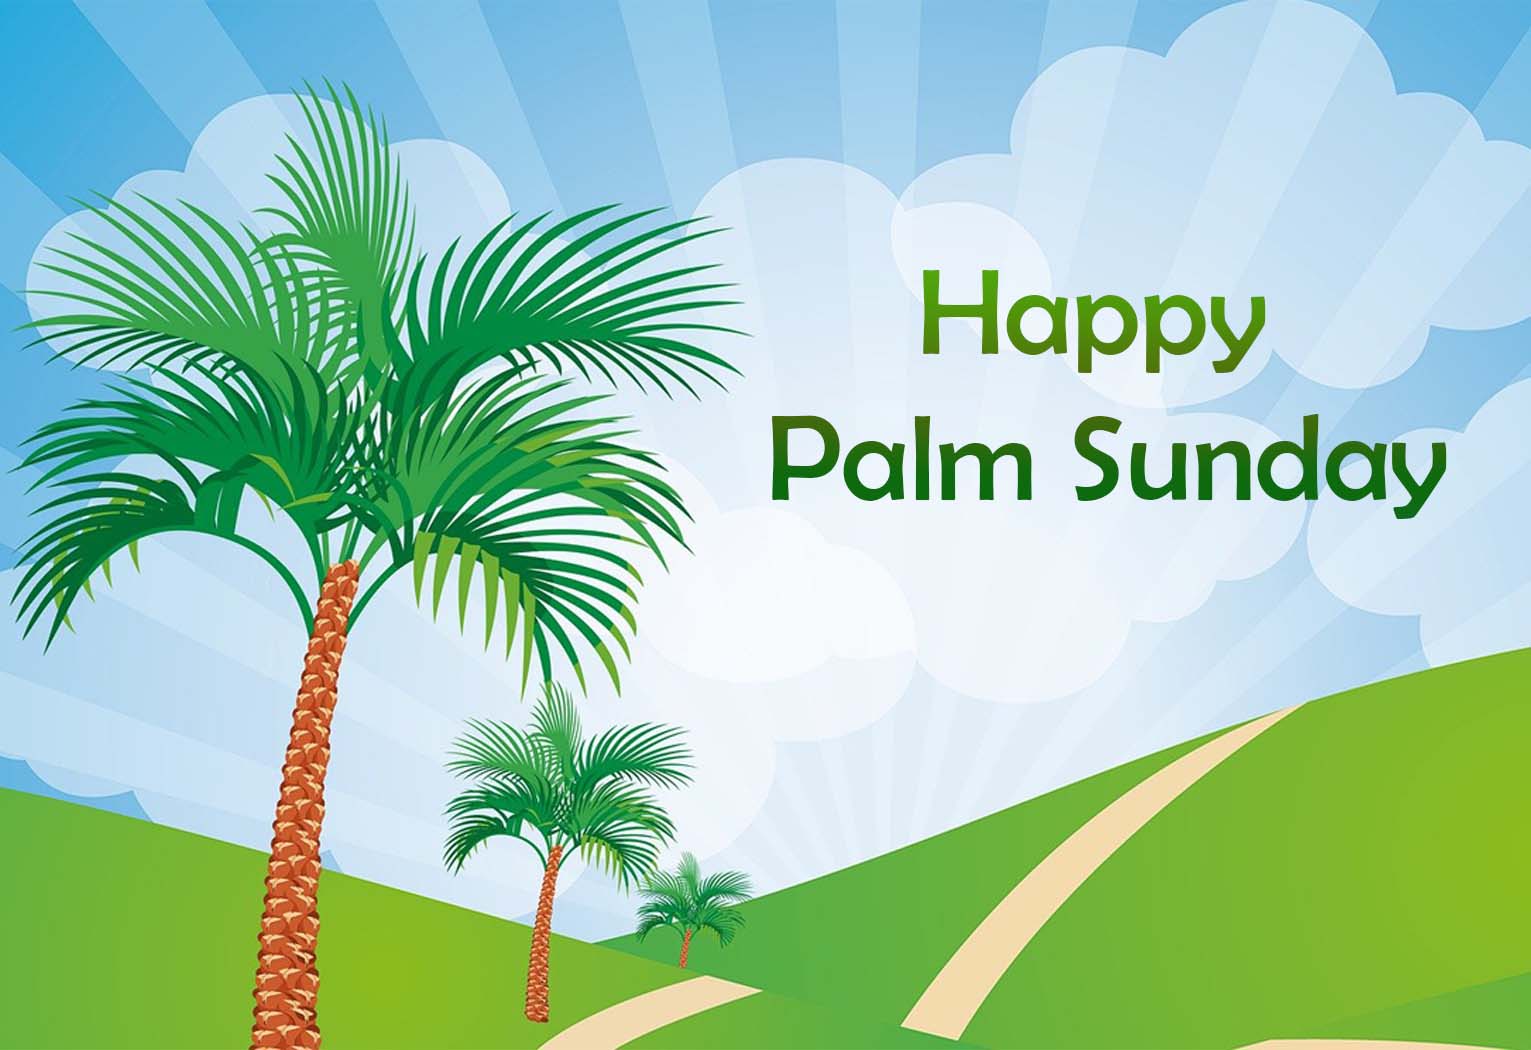 Happy Palm Sunday 2023 Image, Wishes, Quotes, Messages and Greetings